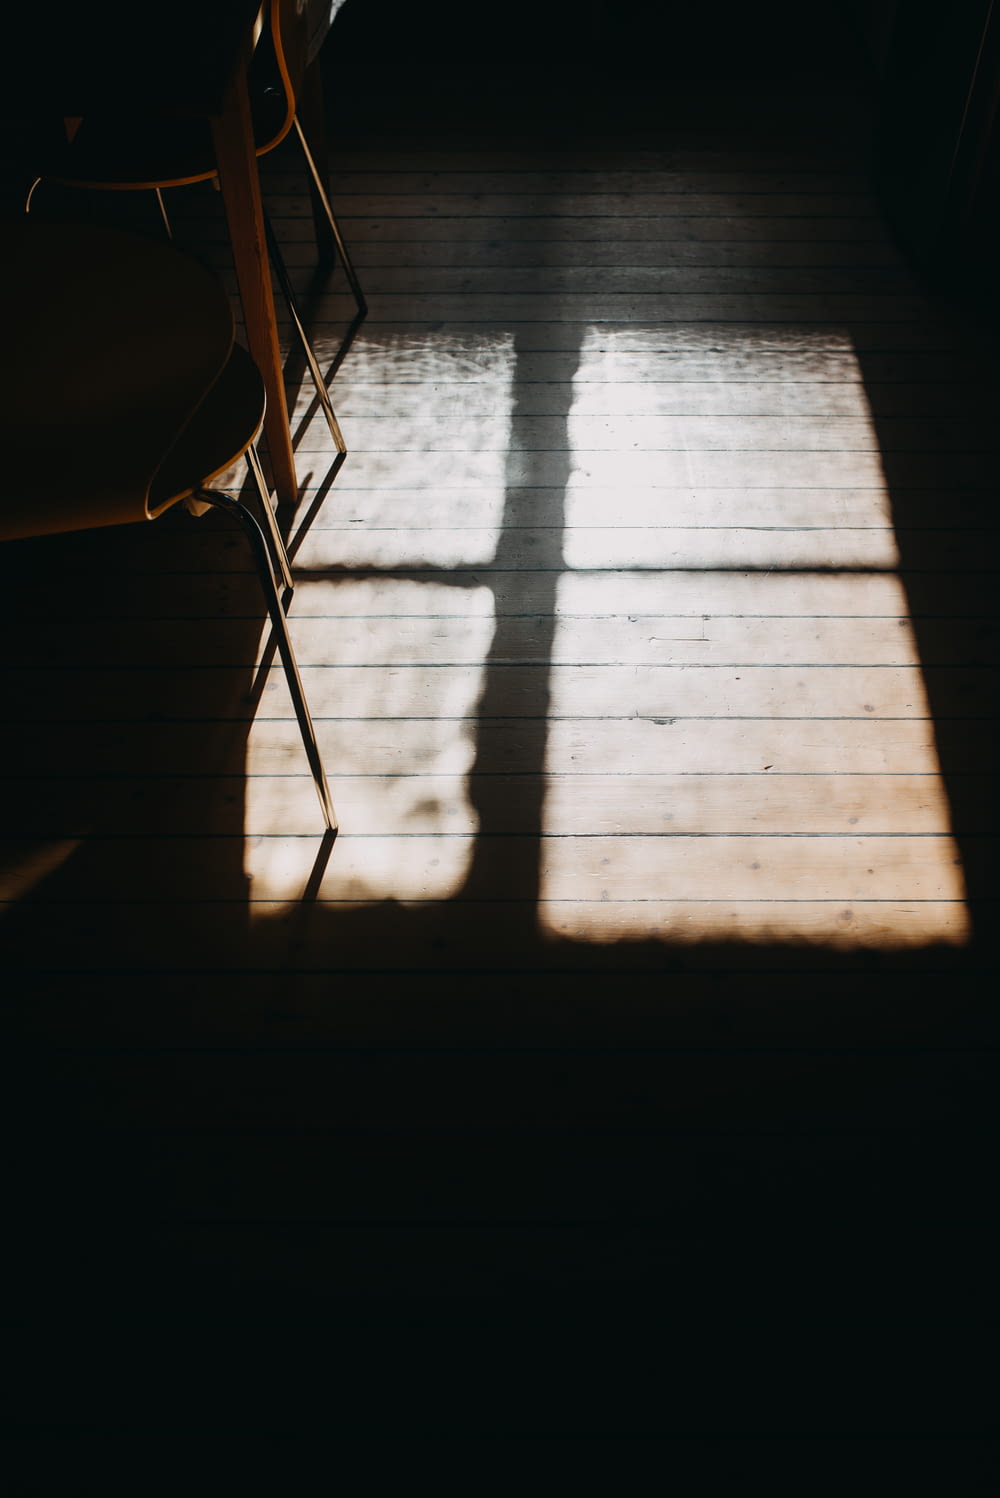 the shadow of two chairs on a wooden floor